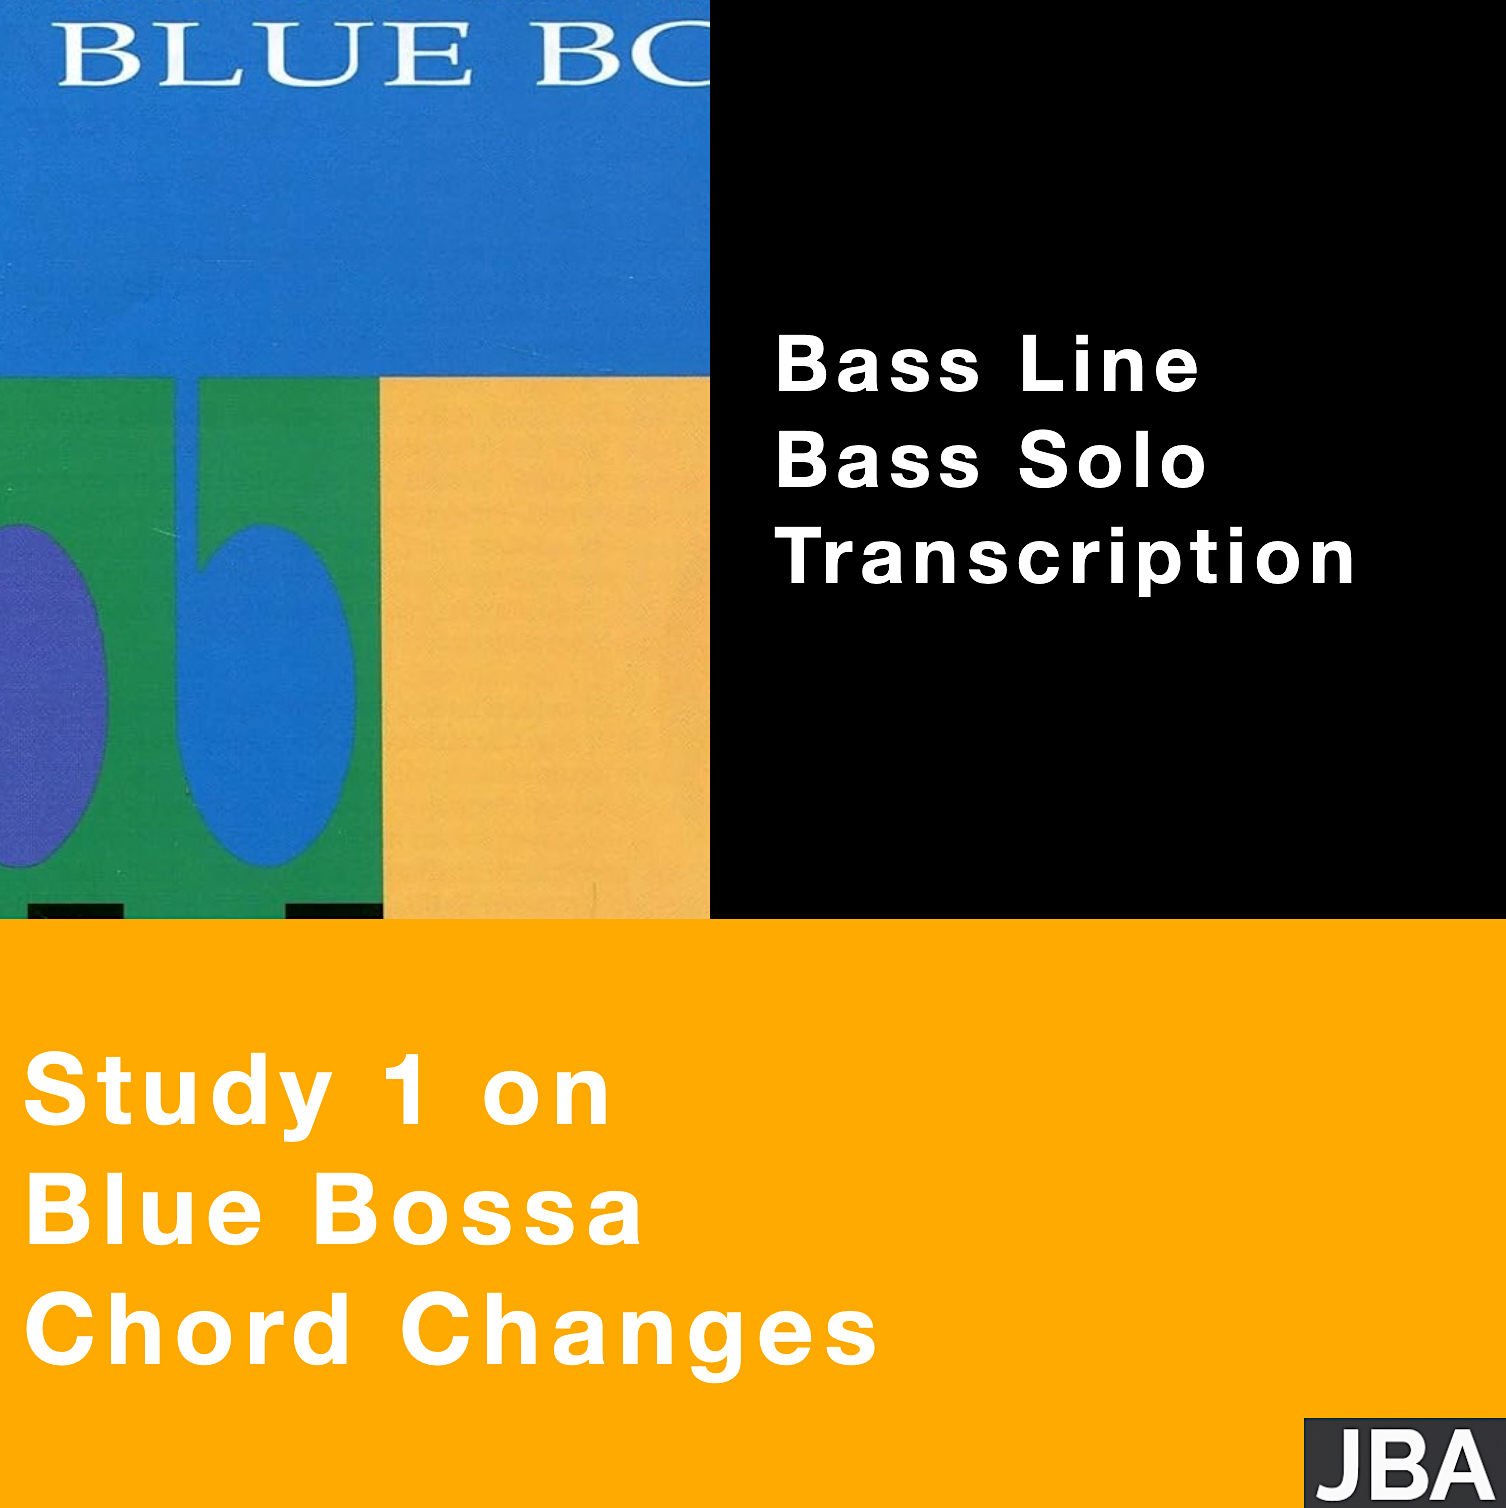 Study 1 on Blue Bossa chord changes